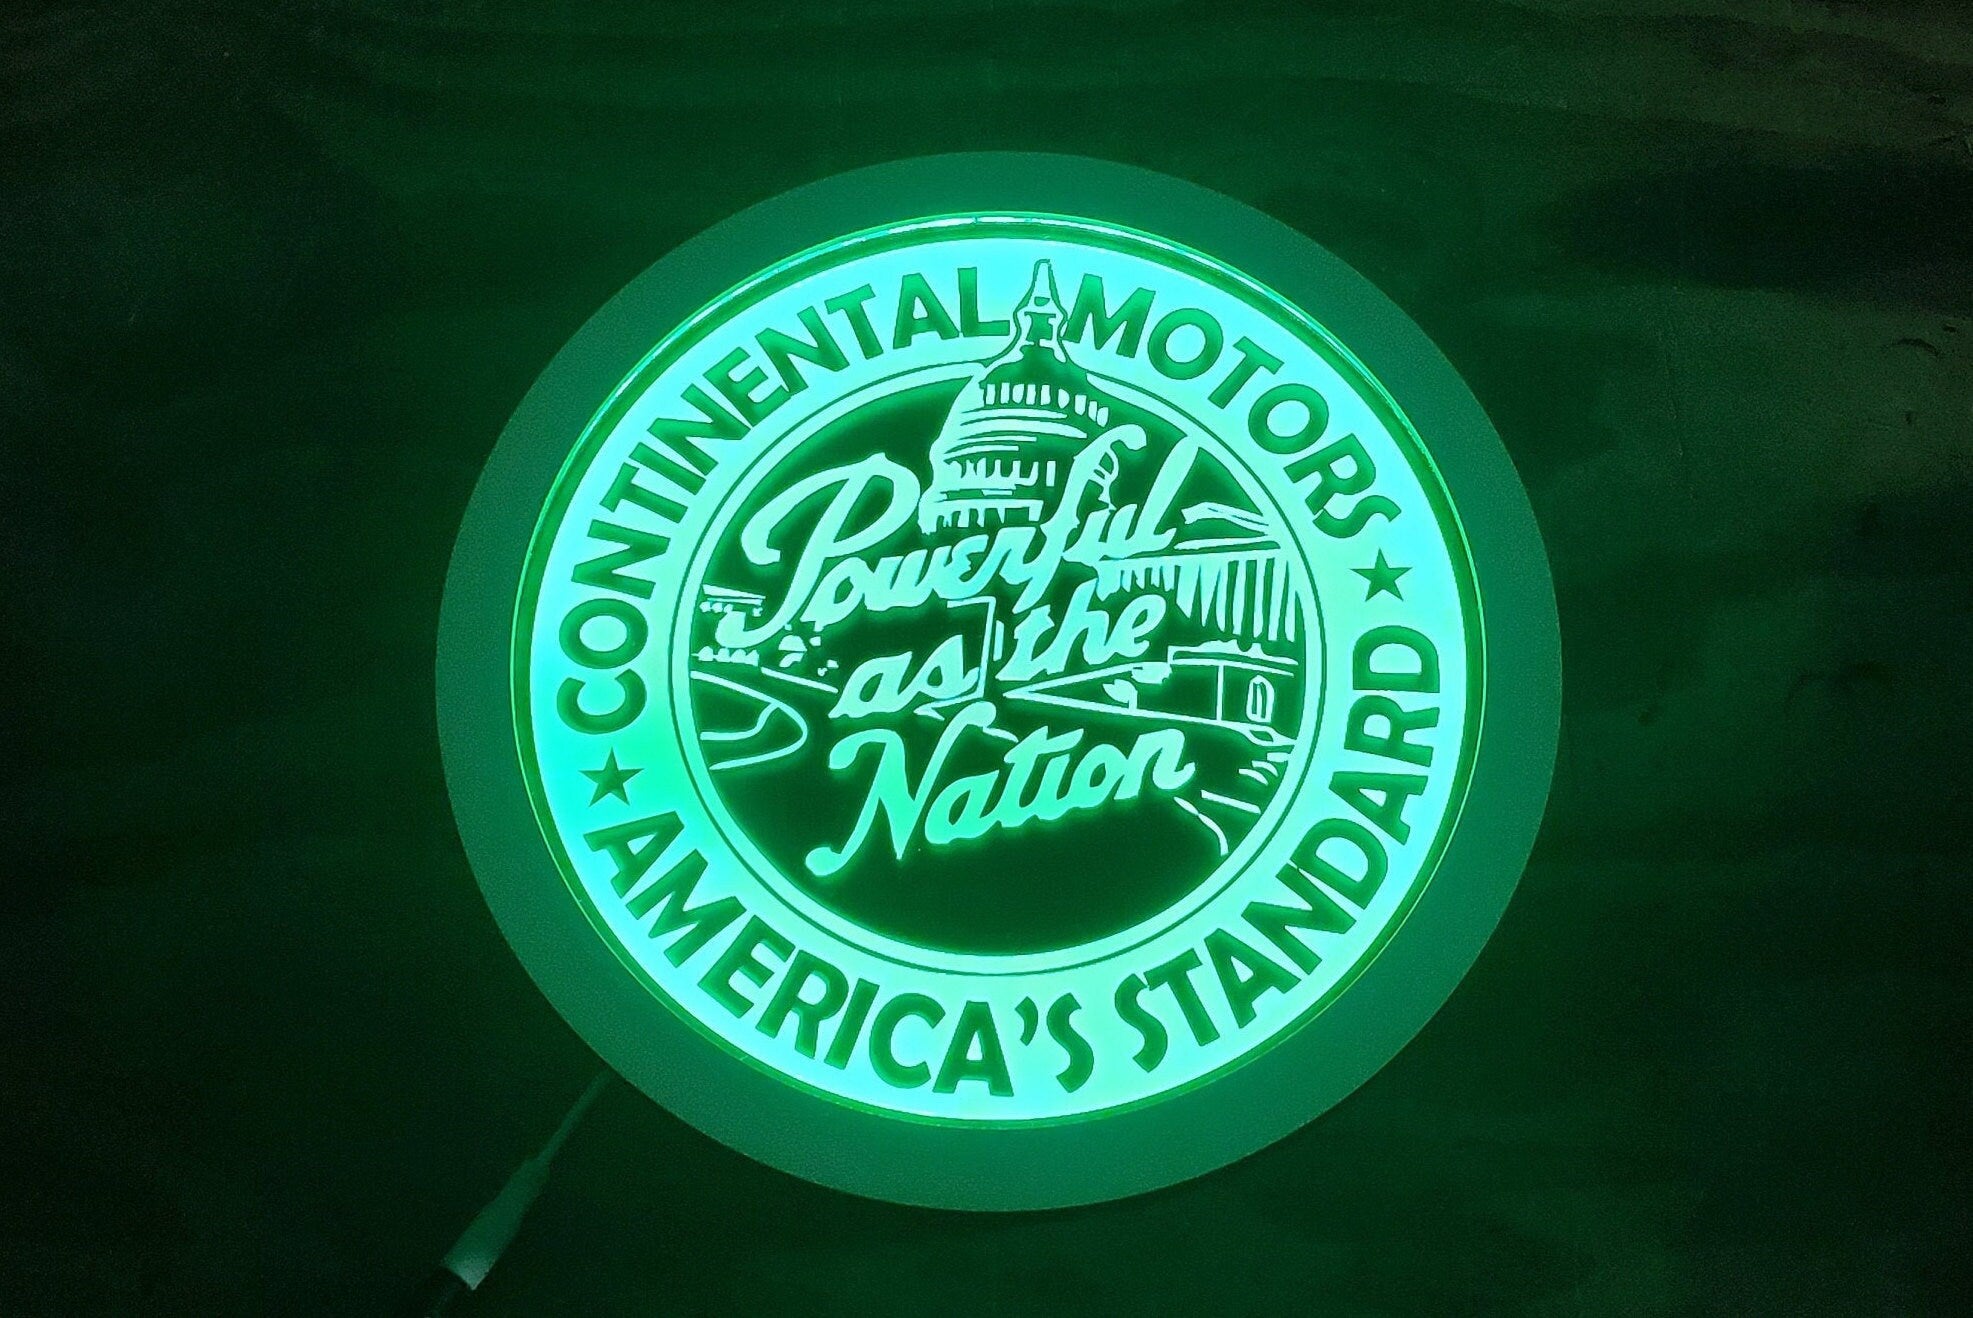 Vintage Continental Motors wall mounted round logo LED light lamp/sign - Neon-like - Free shipping - Made in USA.